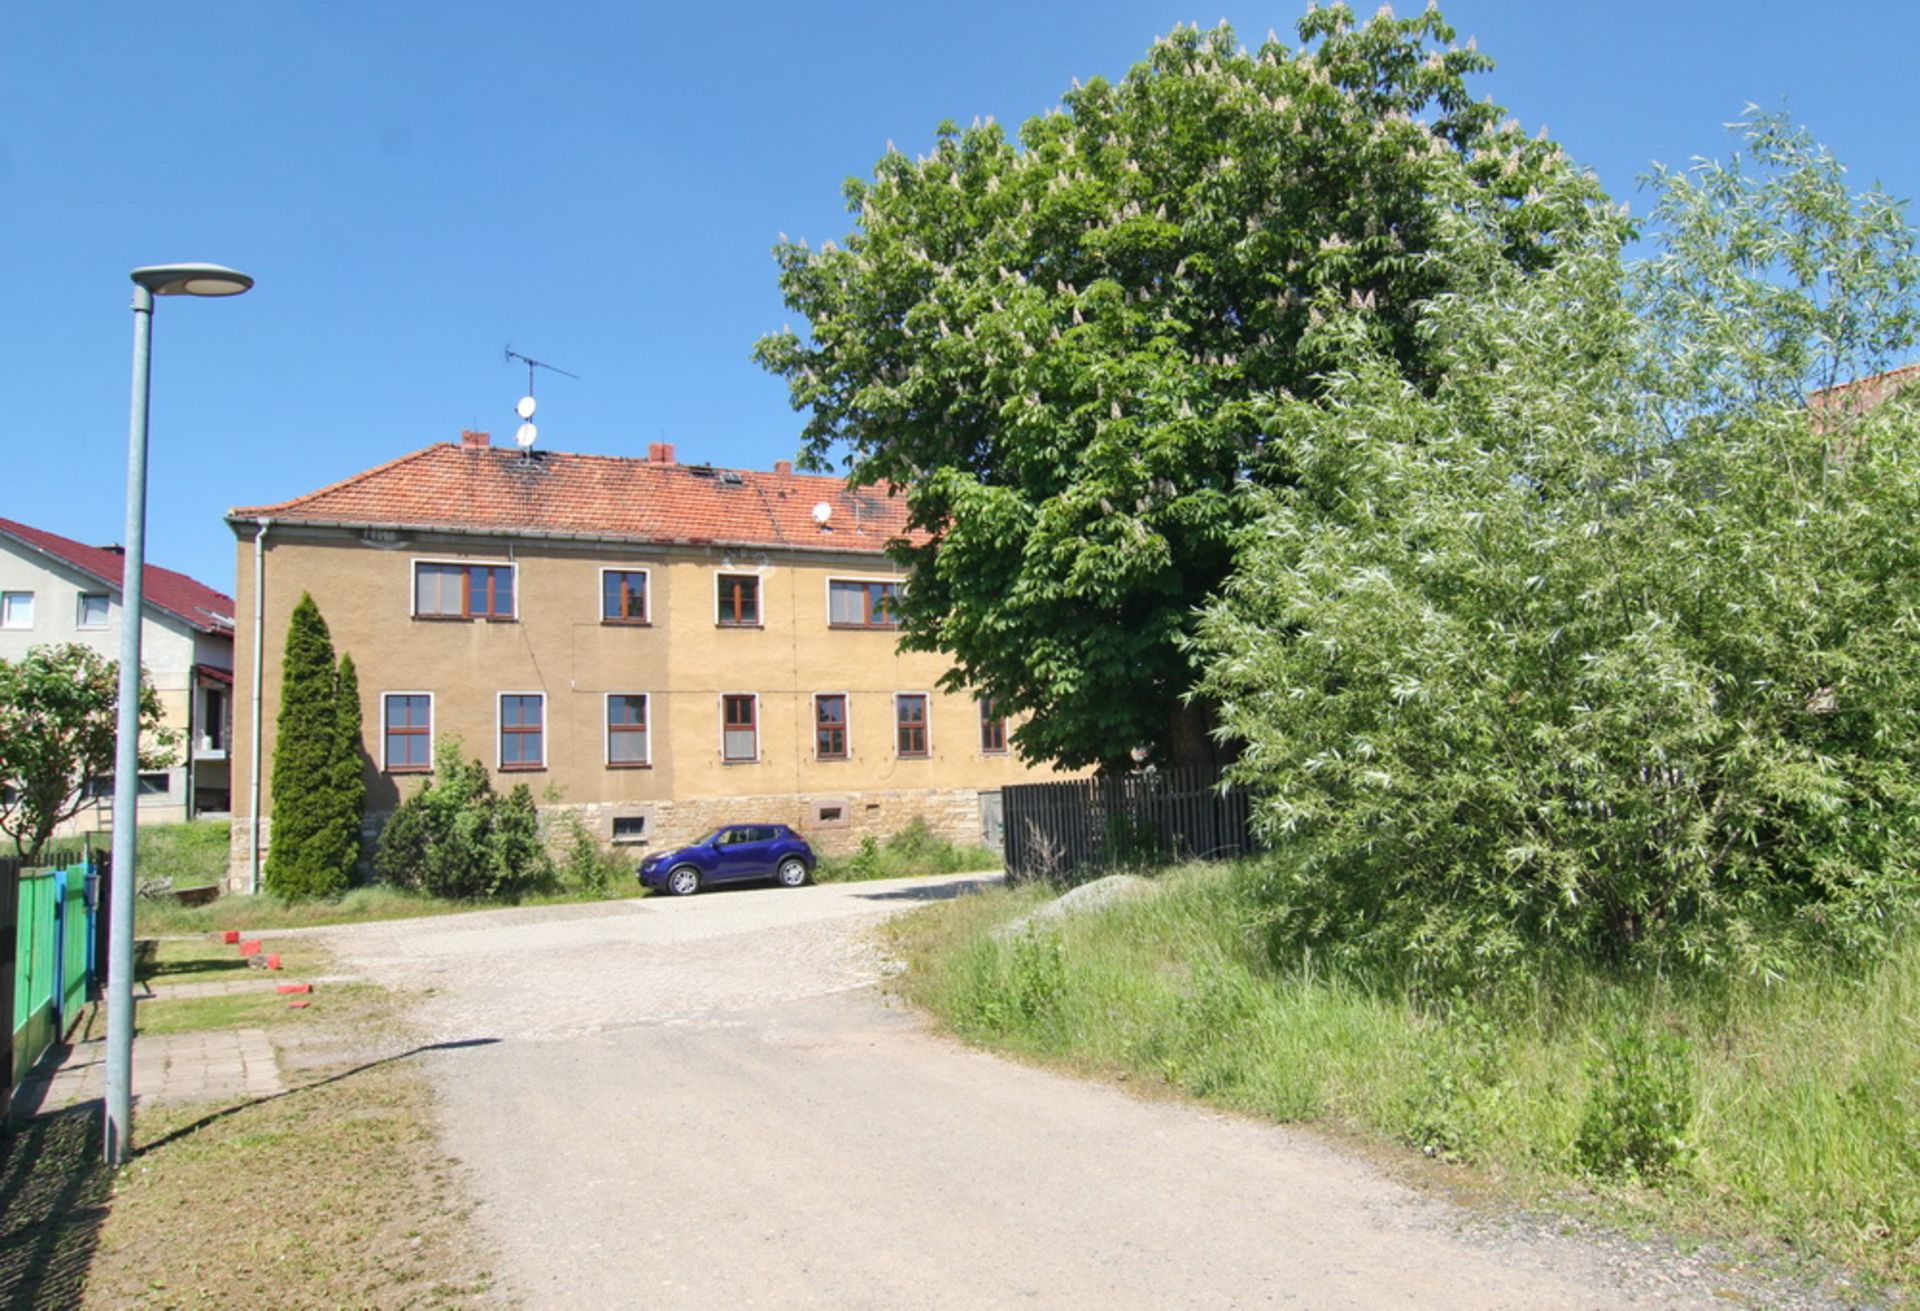 LARGE HOUSING BLOCK HORNSOMMEM, GERMANY READY TO MOVE INTO FREEHOLD VACANT POSSESSION - Image 59 of 91